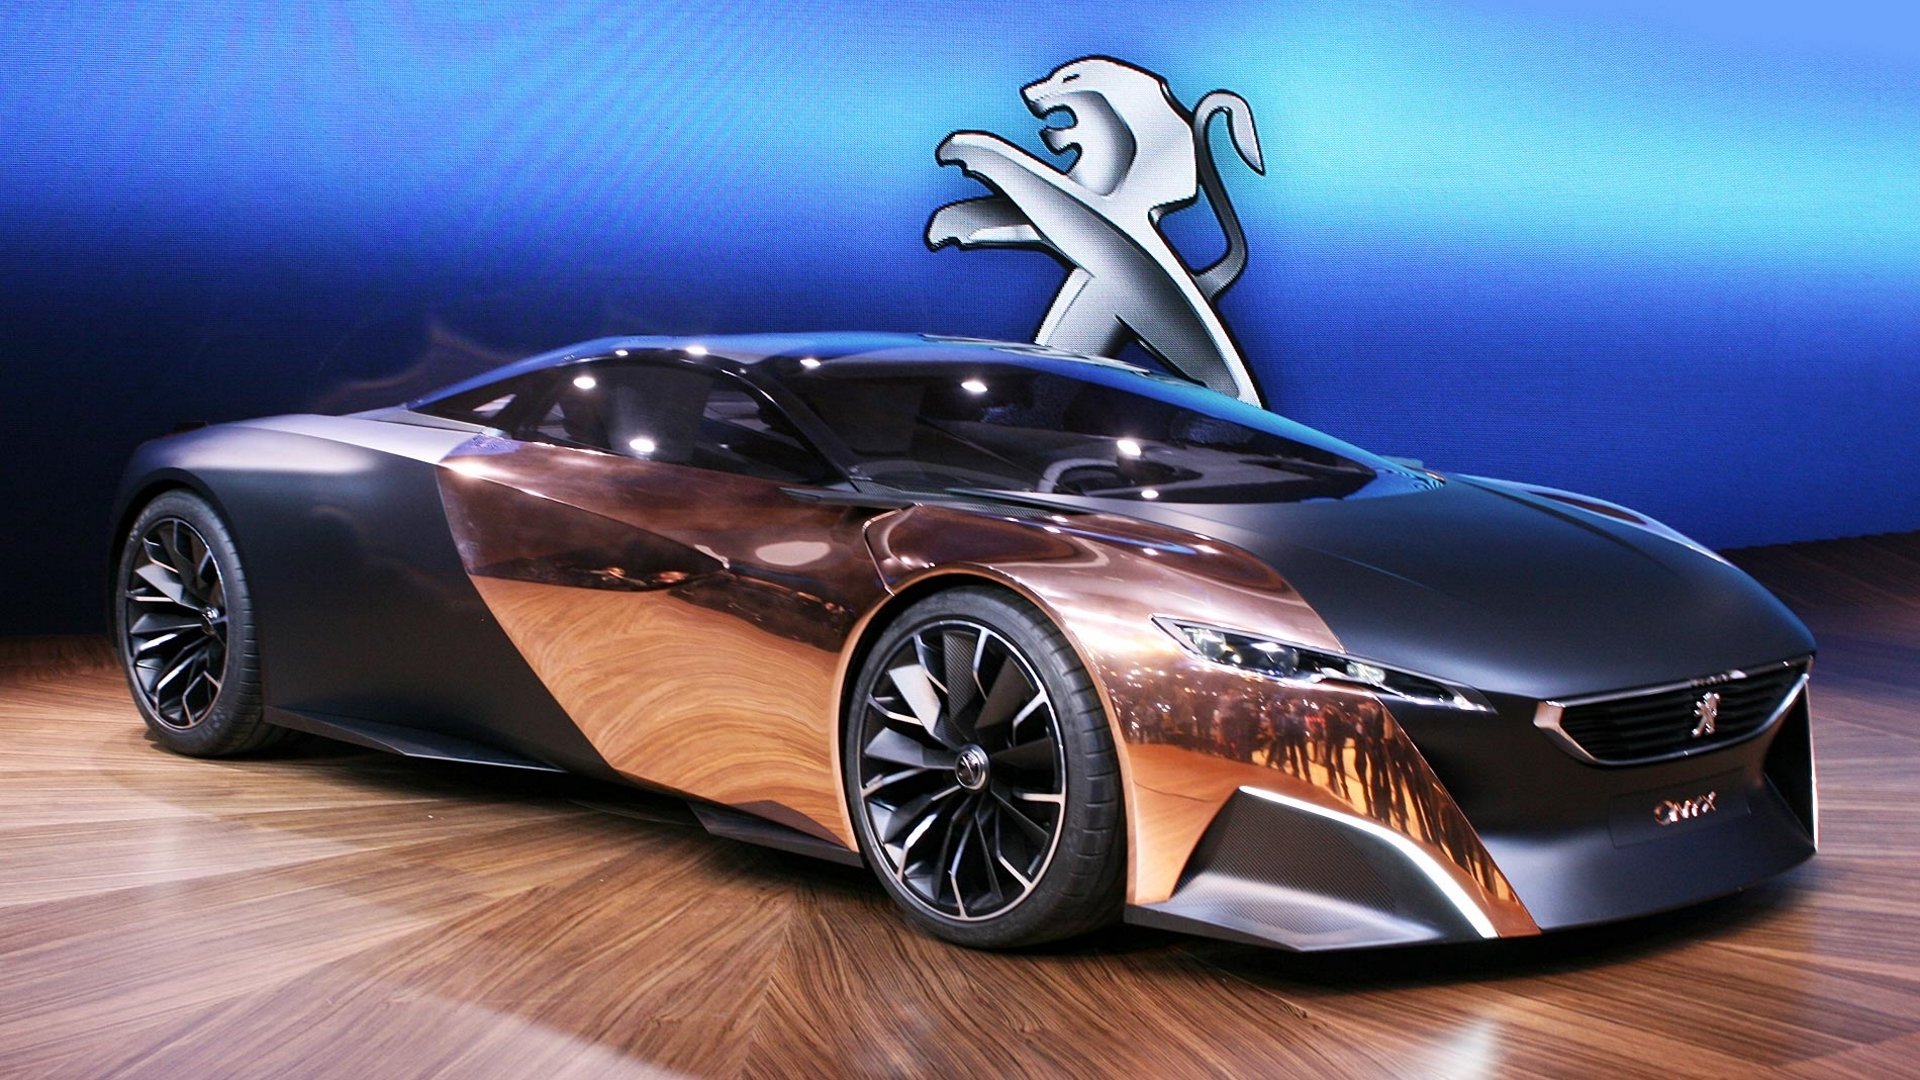 Peugeot Onyx HD Wallpaper and Background